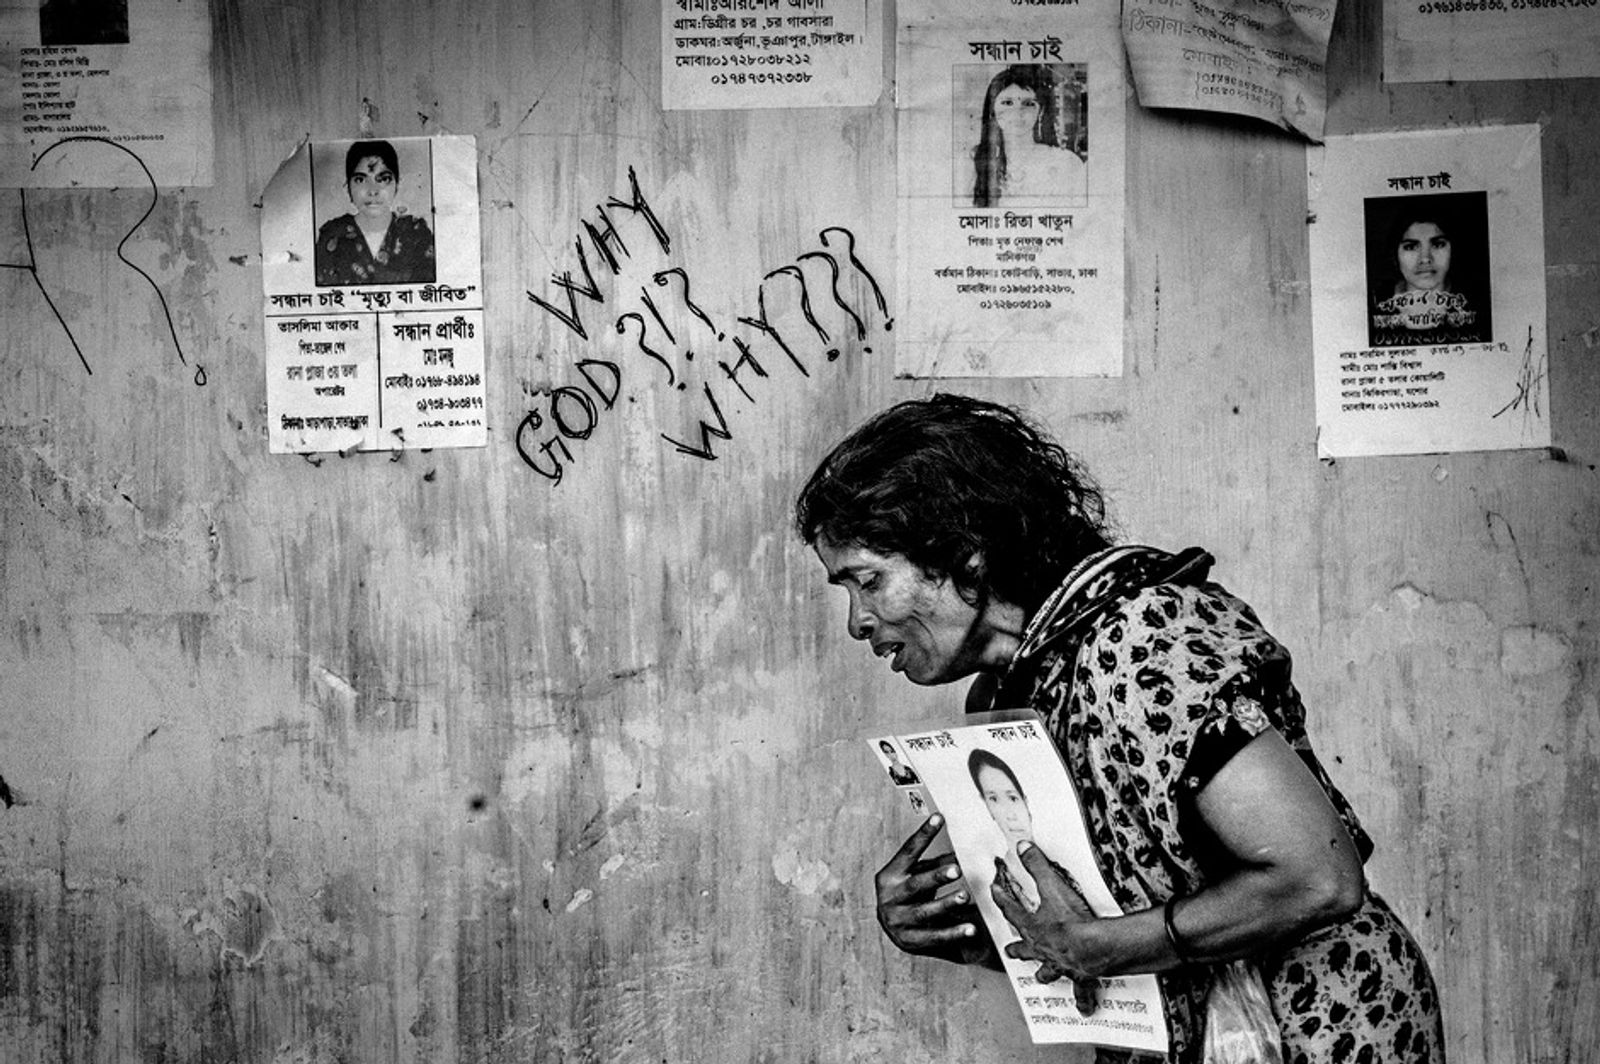 © Rahul Talukder - A woman weeps and holds the picture of a loved one who was a victim of the building collapse.